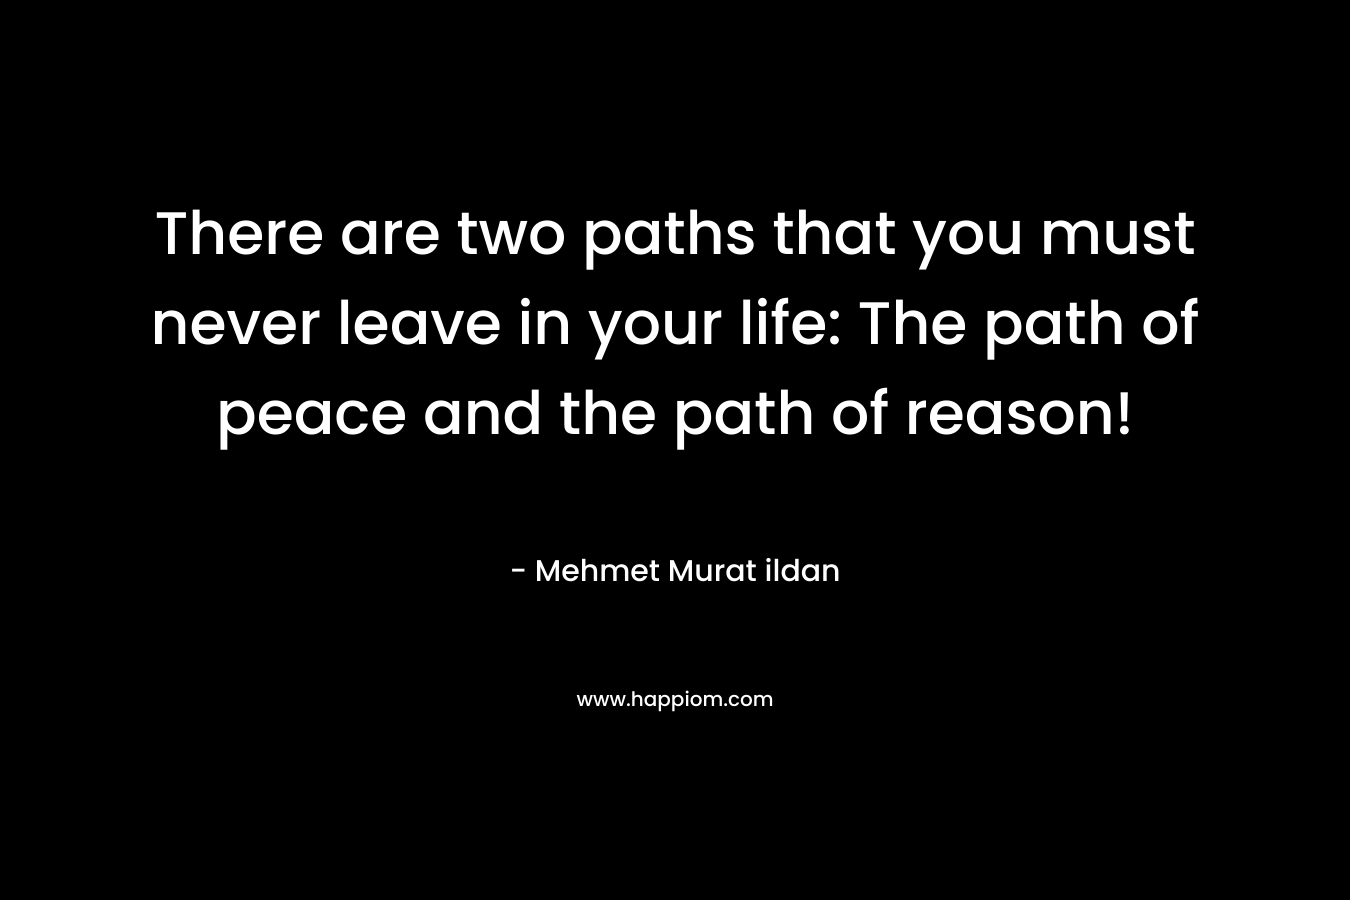 There are two paths that you must never leave in your life: The path of peace and the path of reason!